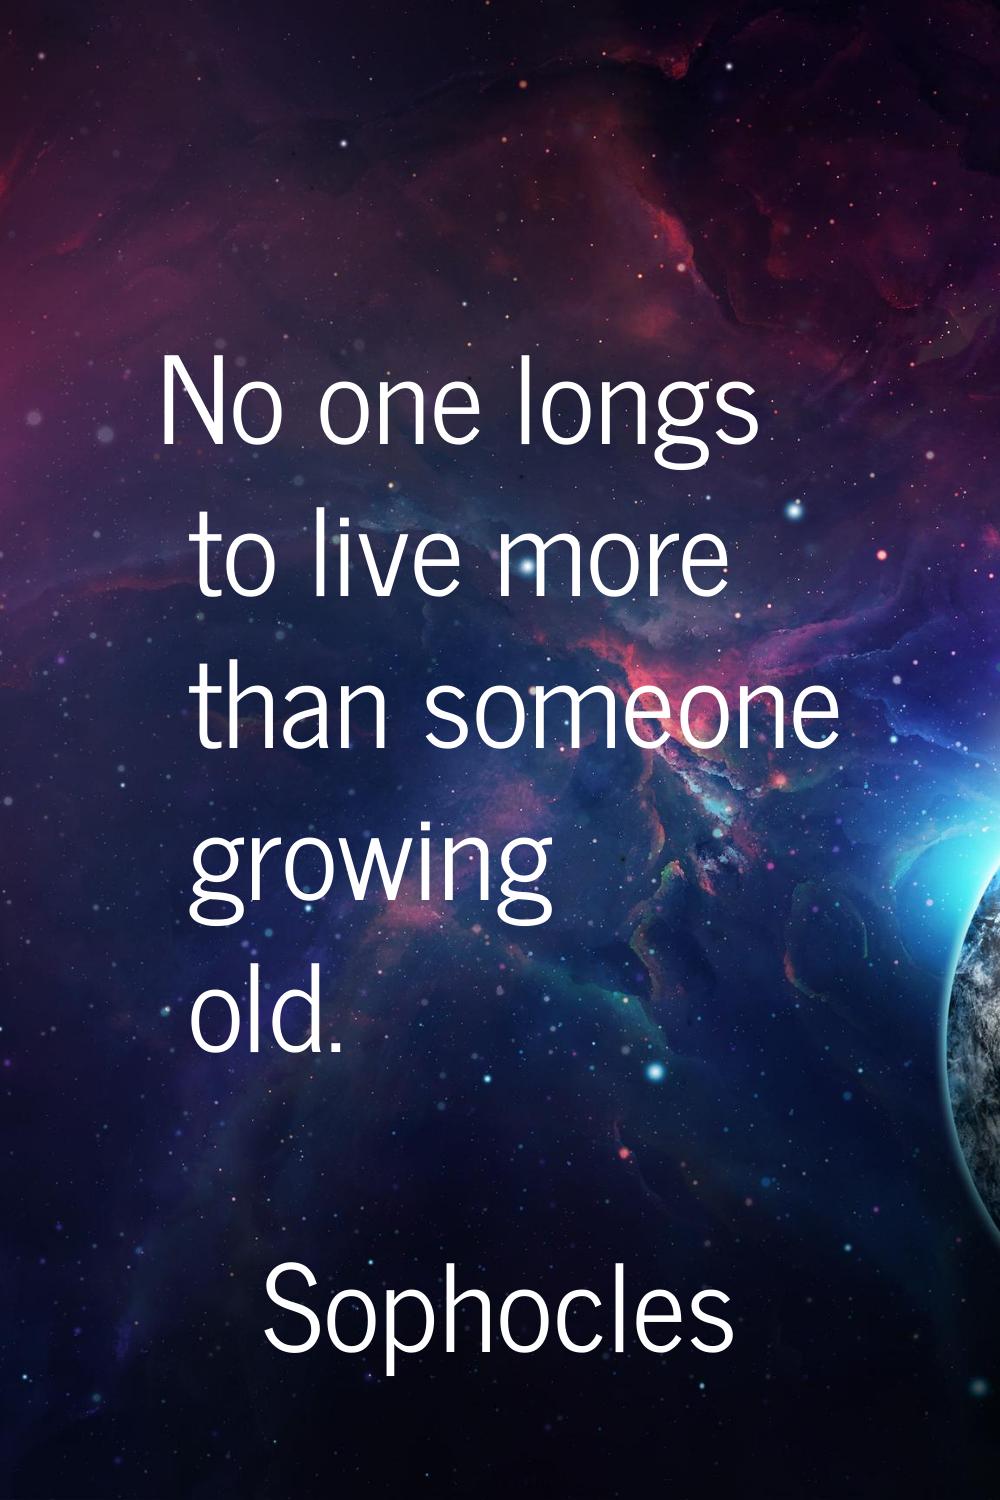 No one longs to live more than someone growing old.